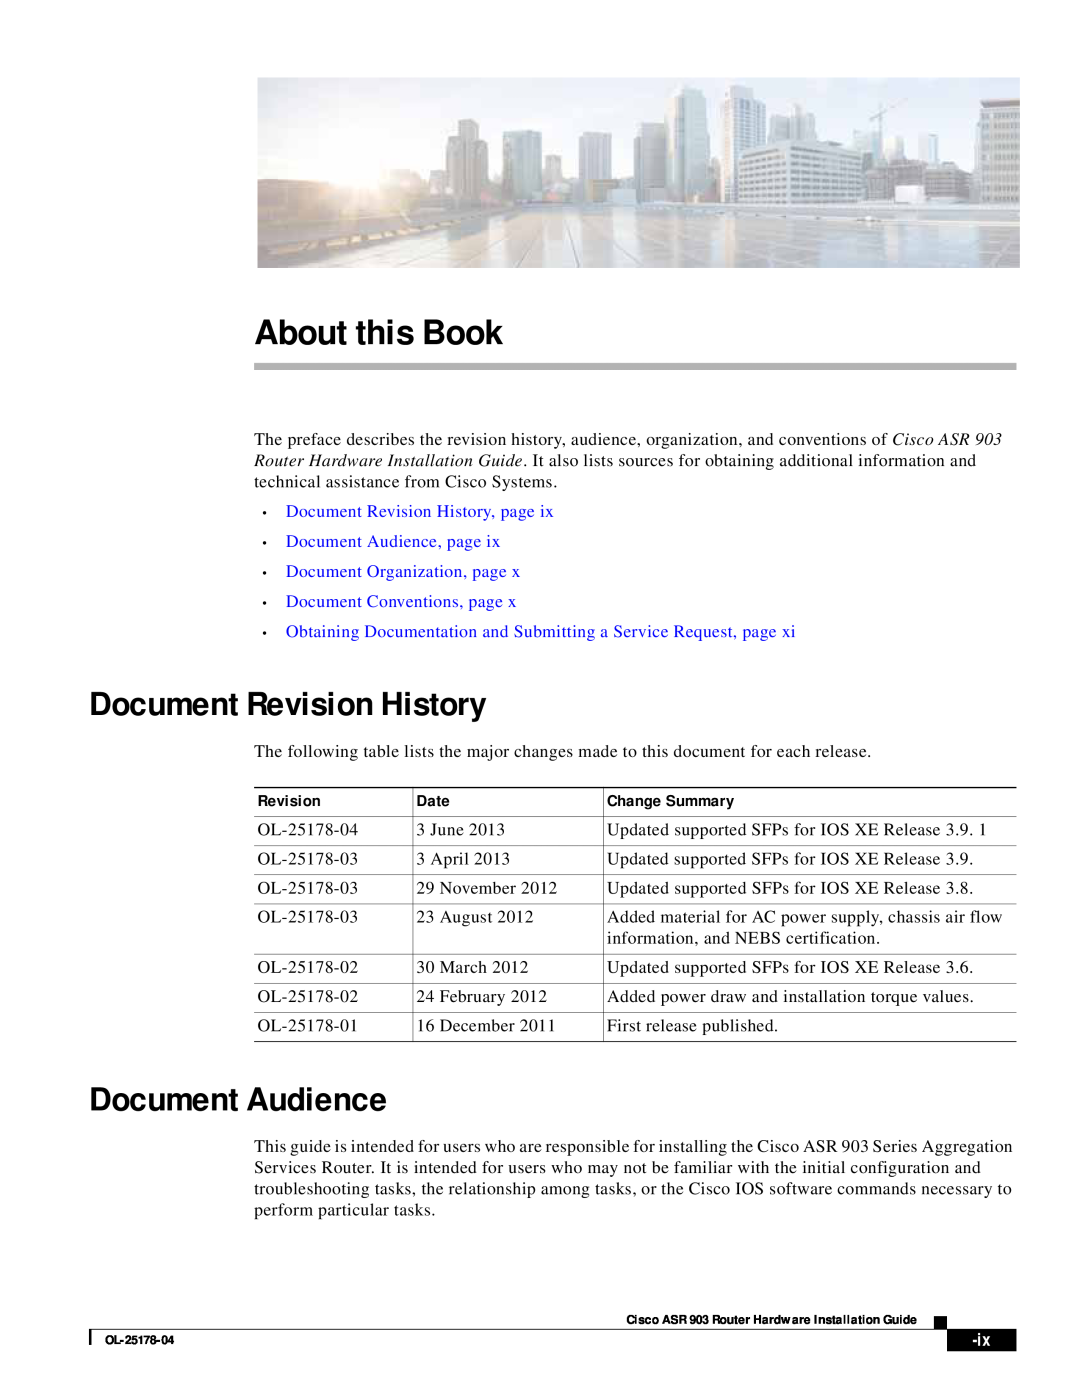 Cisco Systems ASR 903 manual About this Book, Document Revision History, Document Audience 